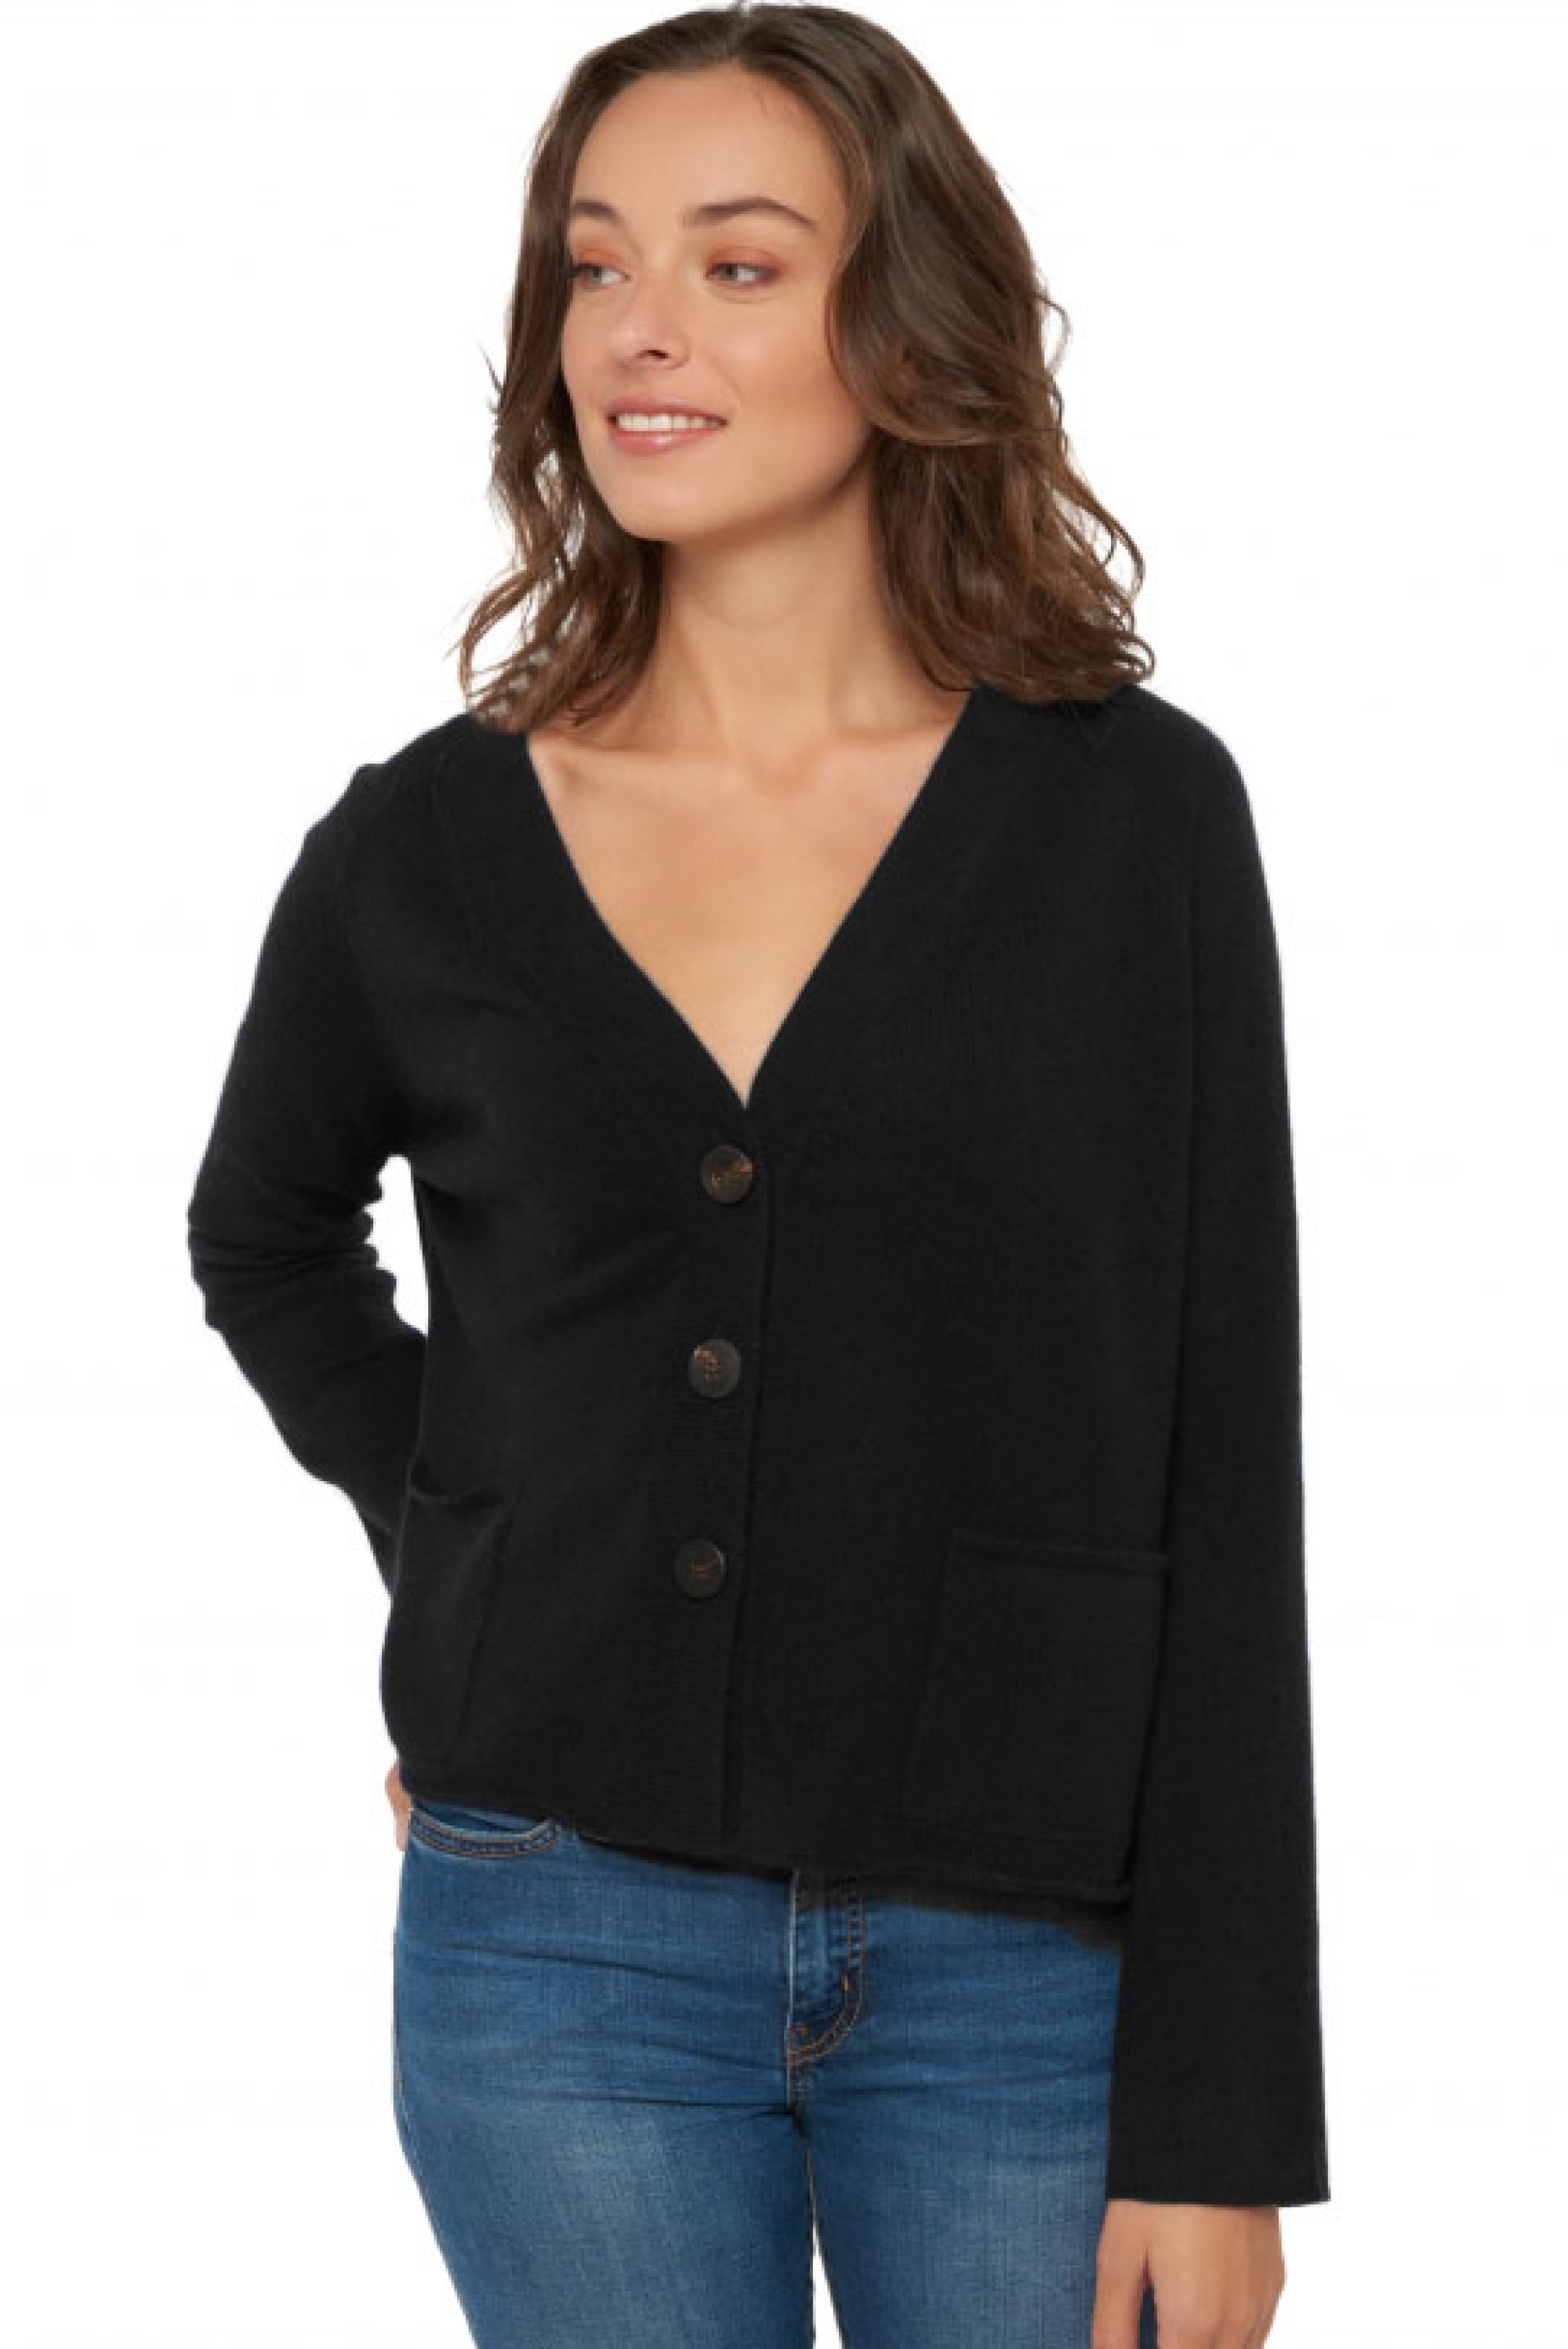 Cashmere ladies our full range of women s sweaters chana black s3